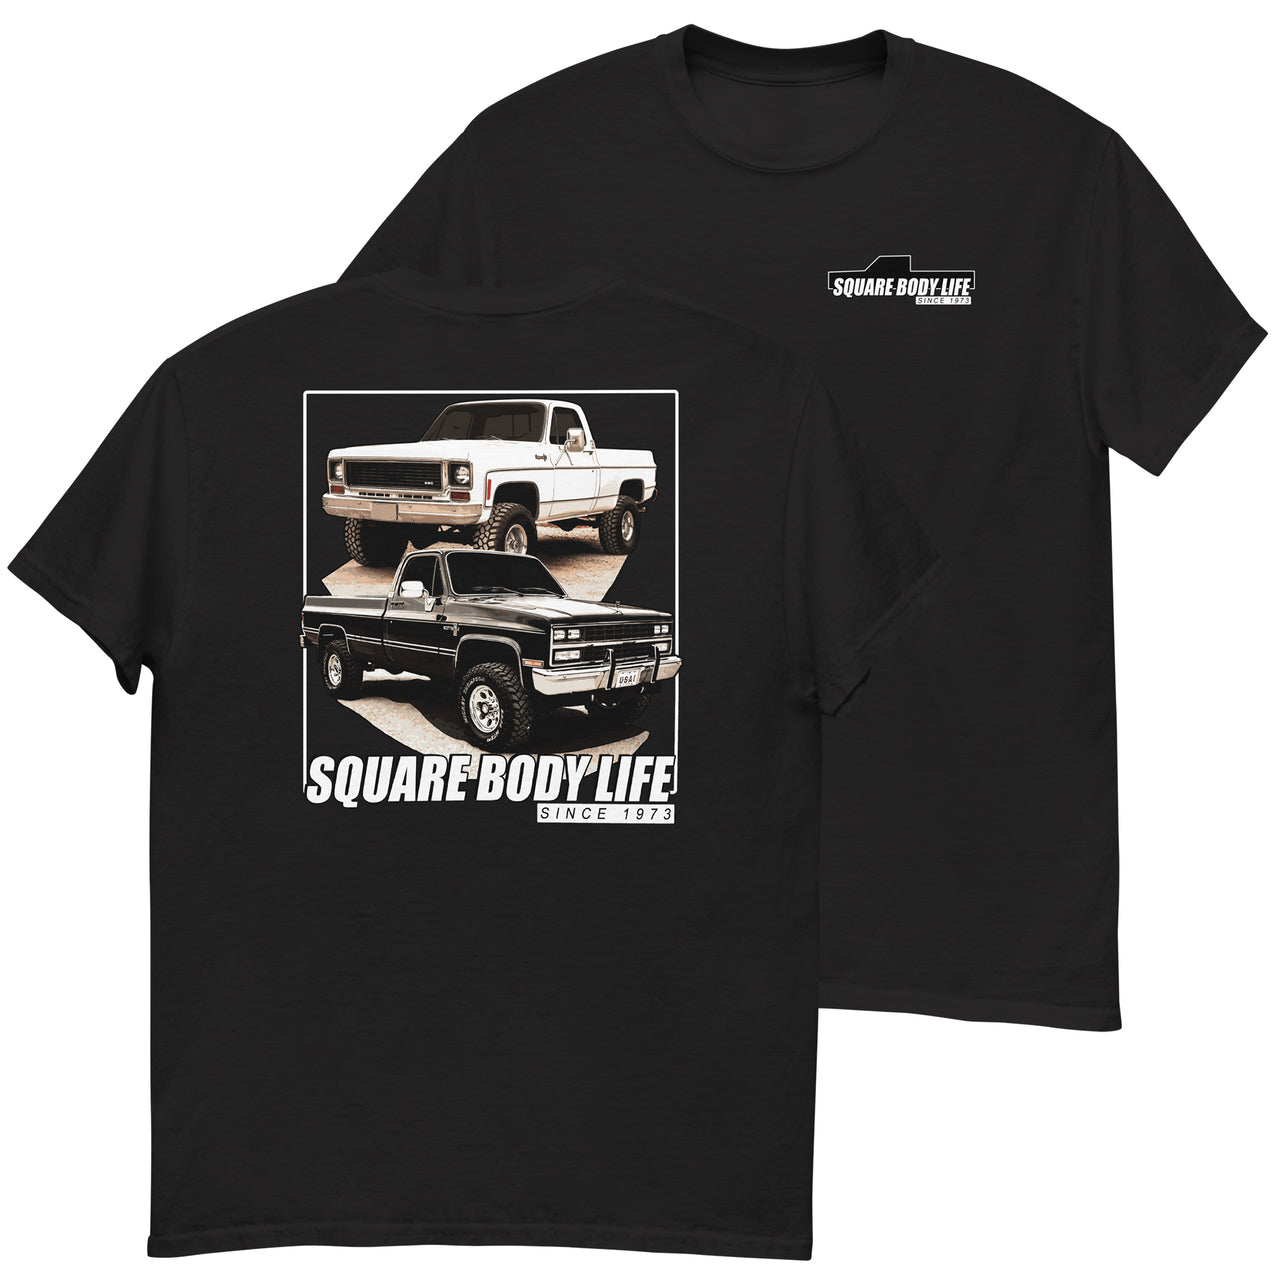 Square Body Life T-Shirt in black